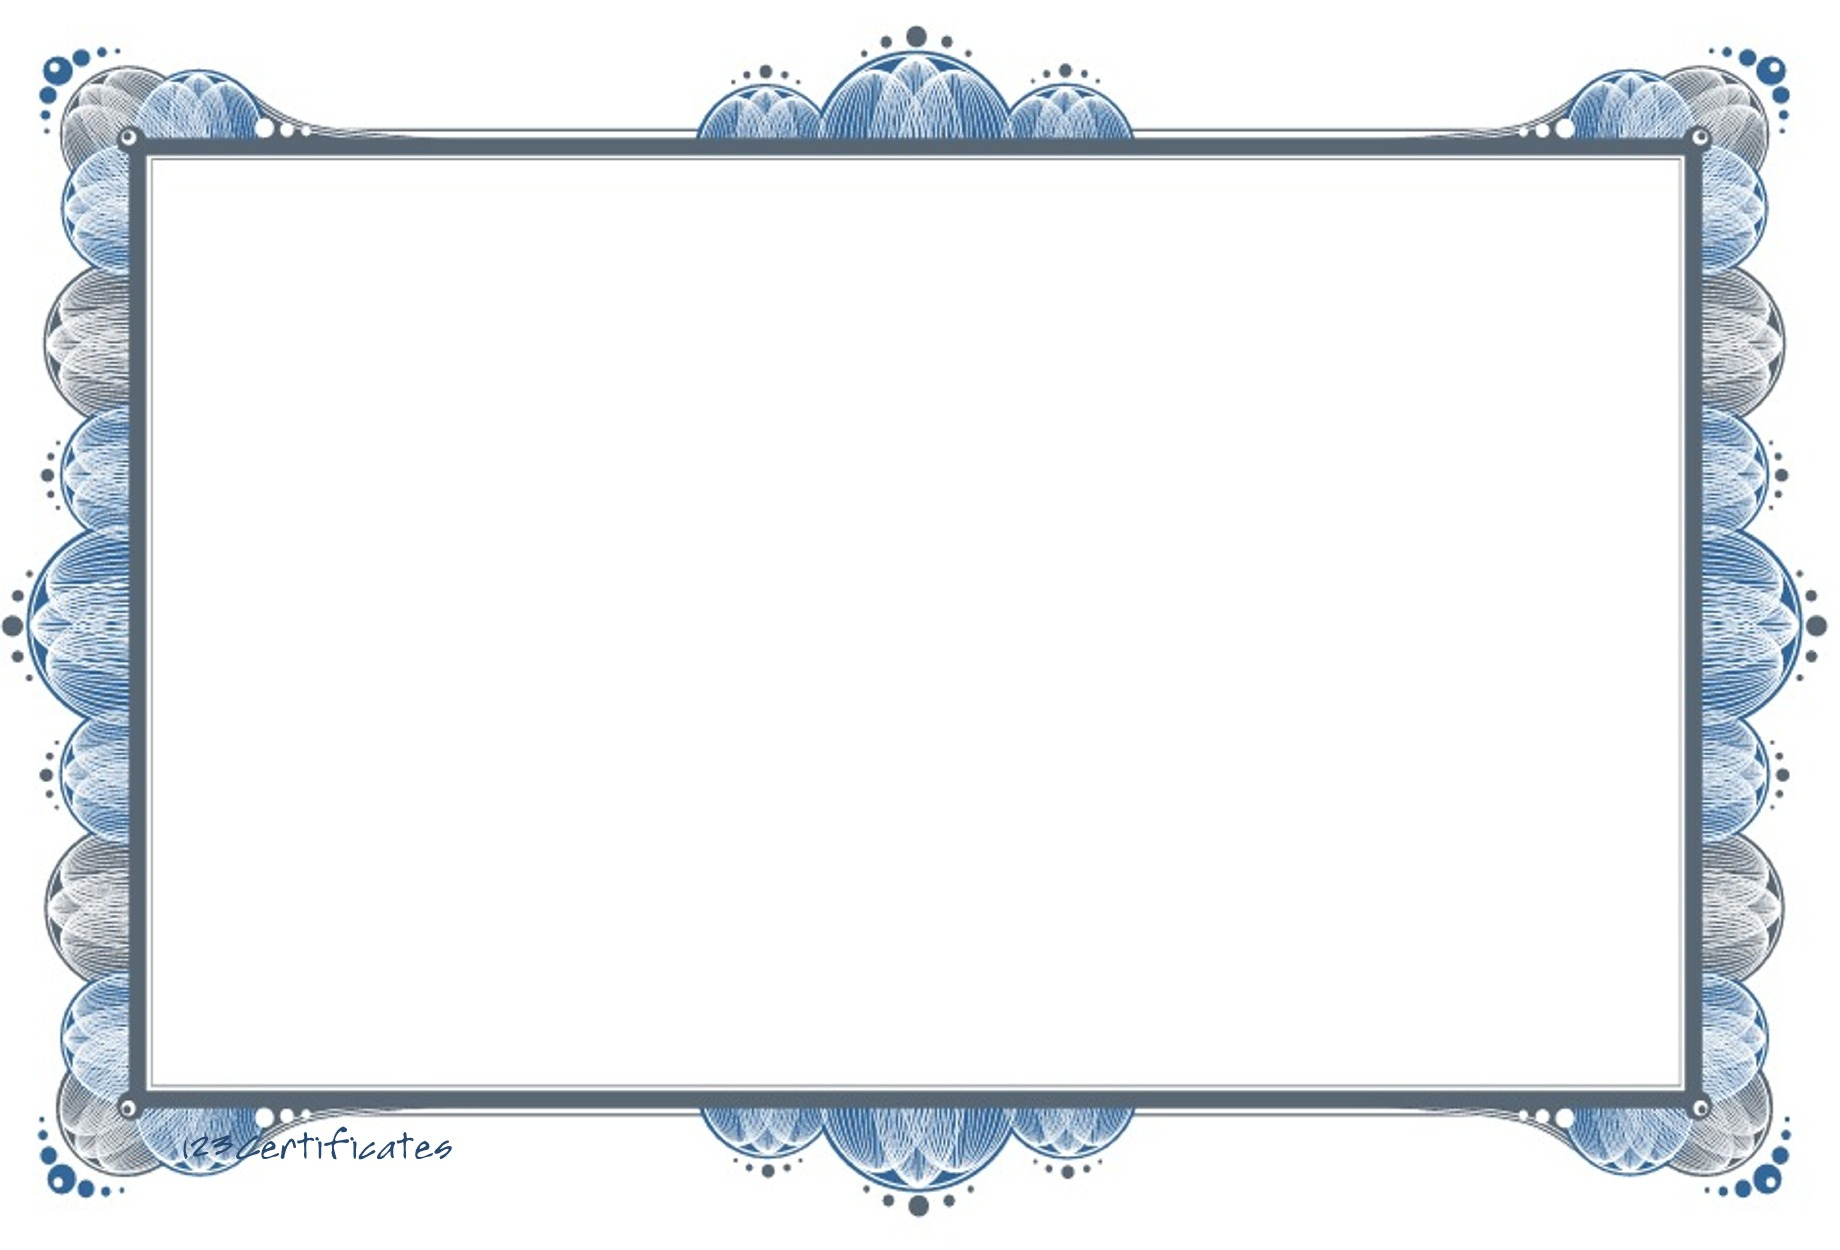 Free Certificate Borders To Download For Landscape Certificate Templates